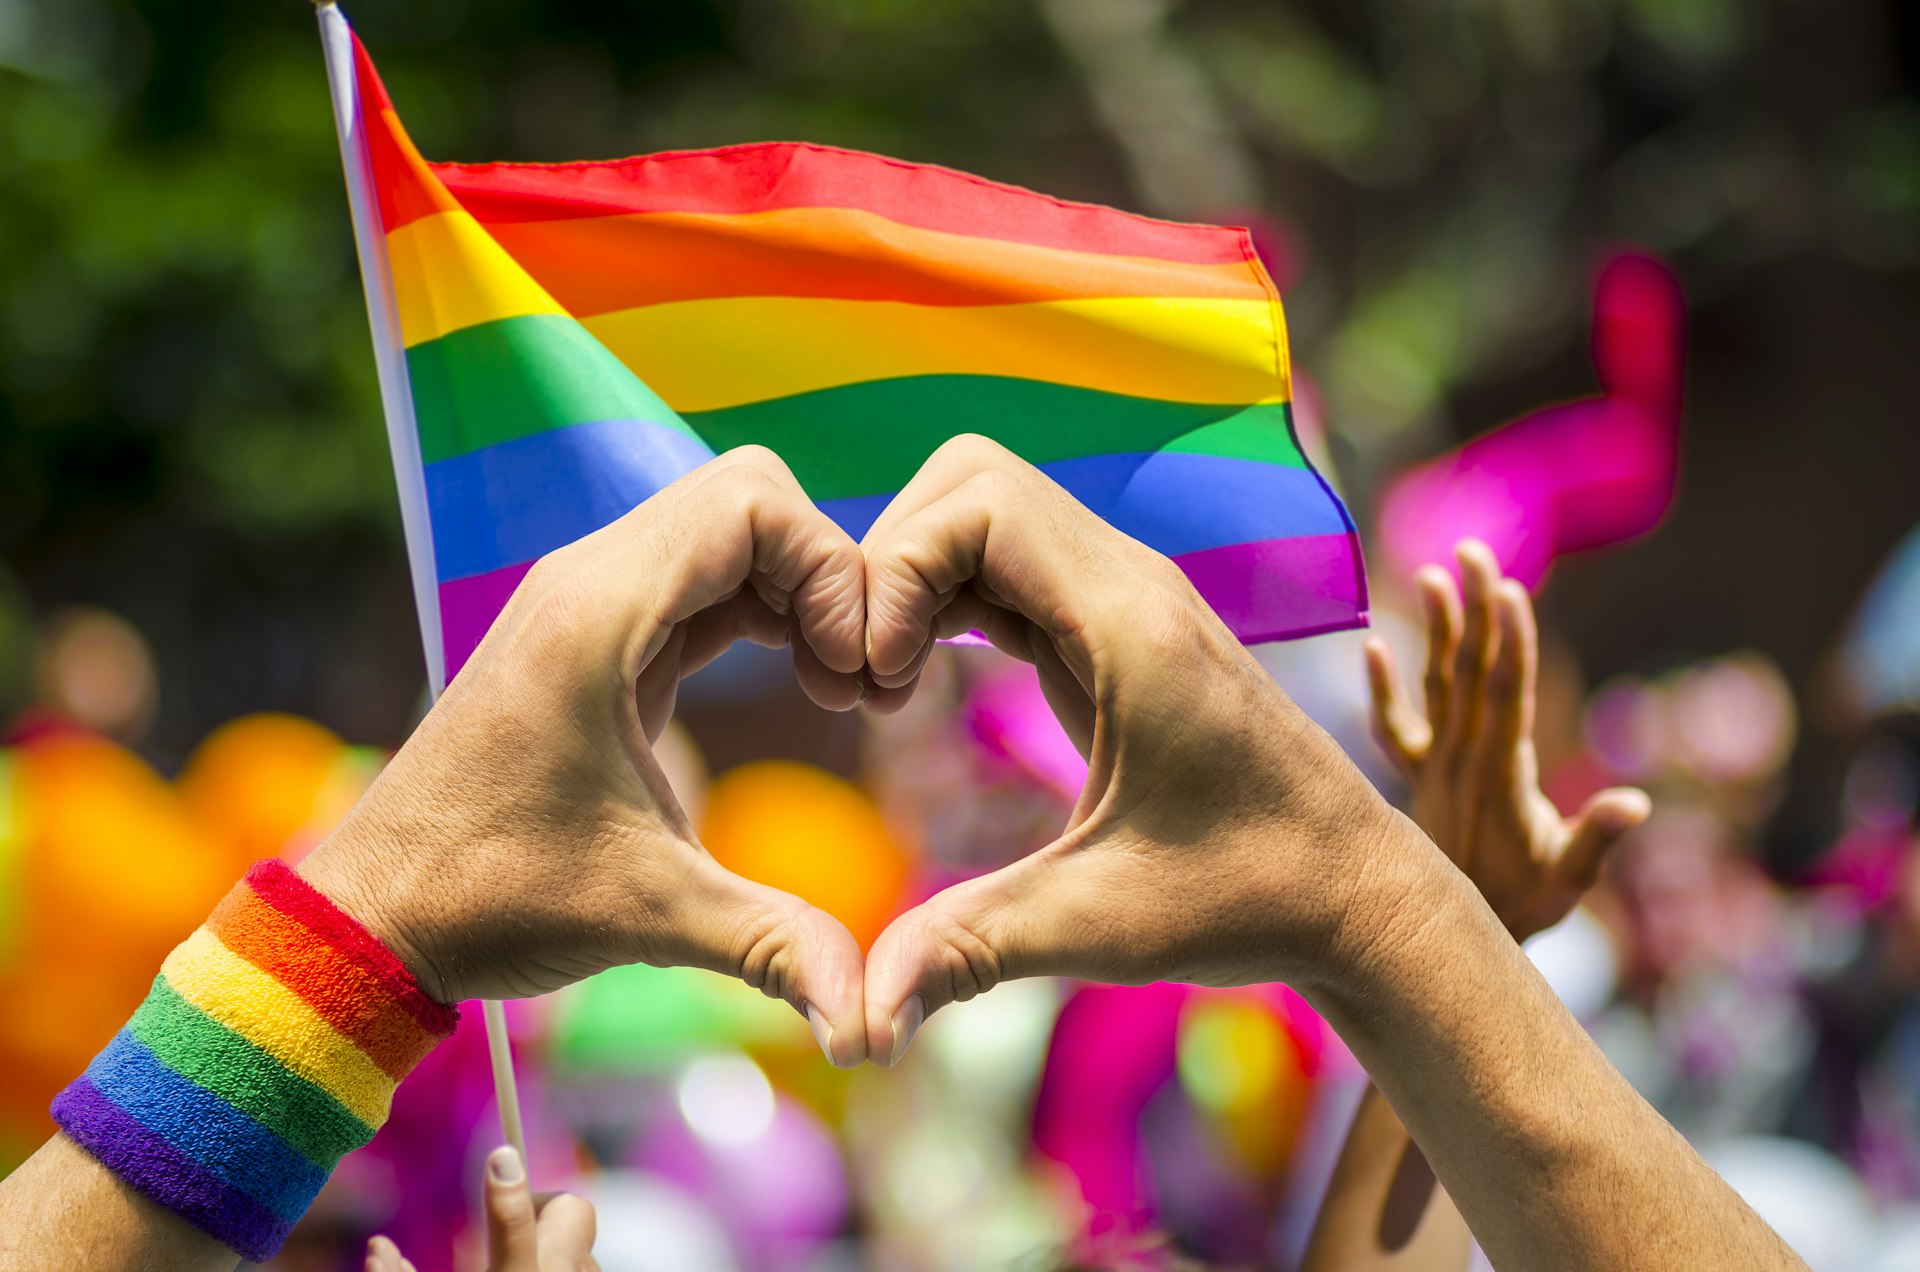 Supporting hands make a heart sign in front of a rainbow flag at a summer gay pride parade in New York. 